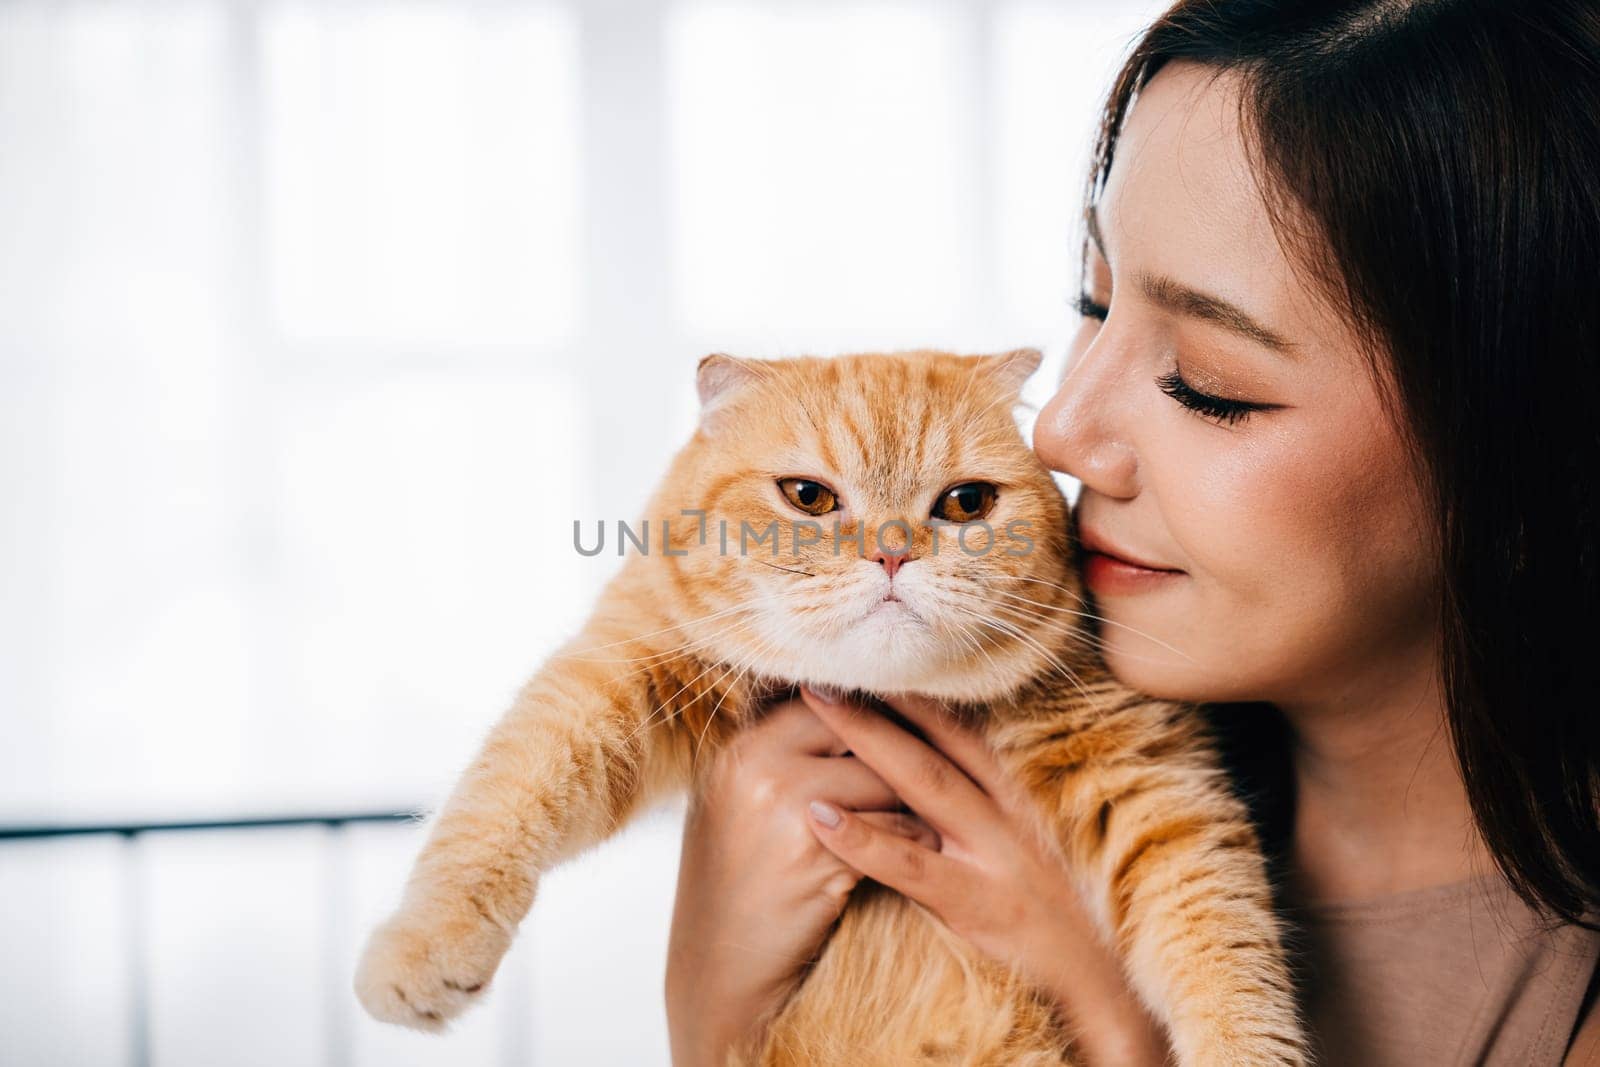 A woman's tender moment with her adorable long-haired kitty, an orange Scottish Fold cat. It emphasizes the special connection between them in a comfortable home setting.